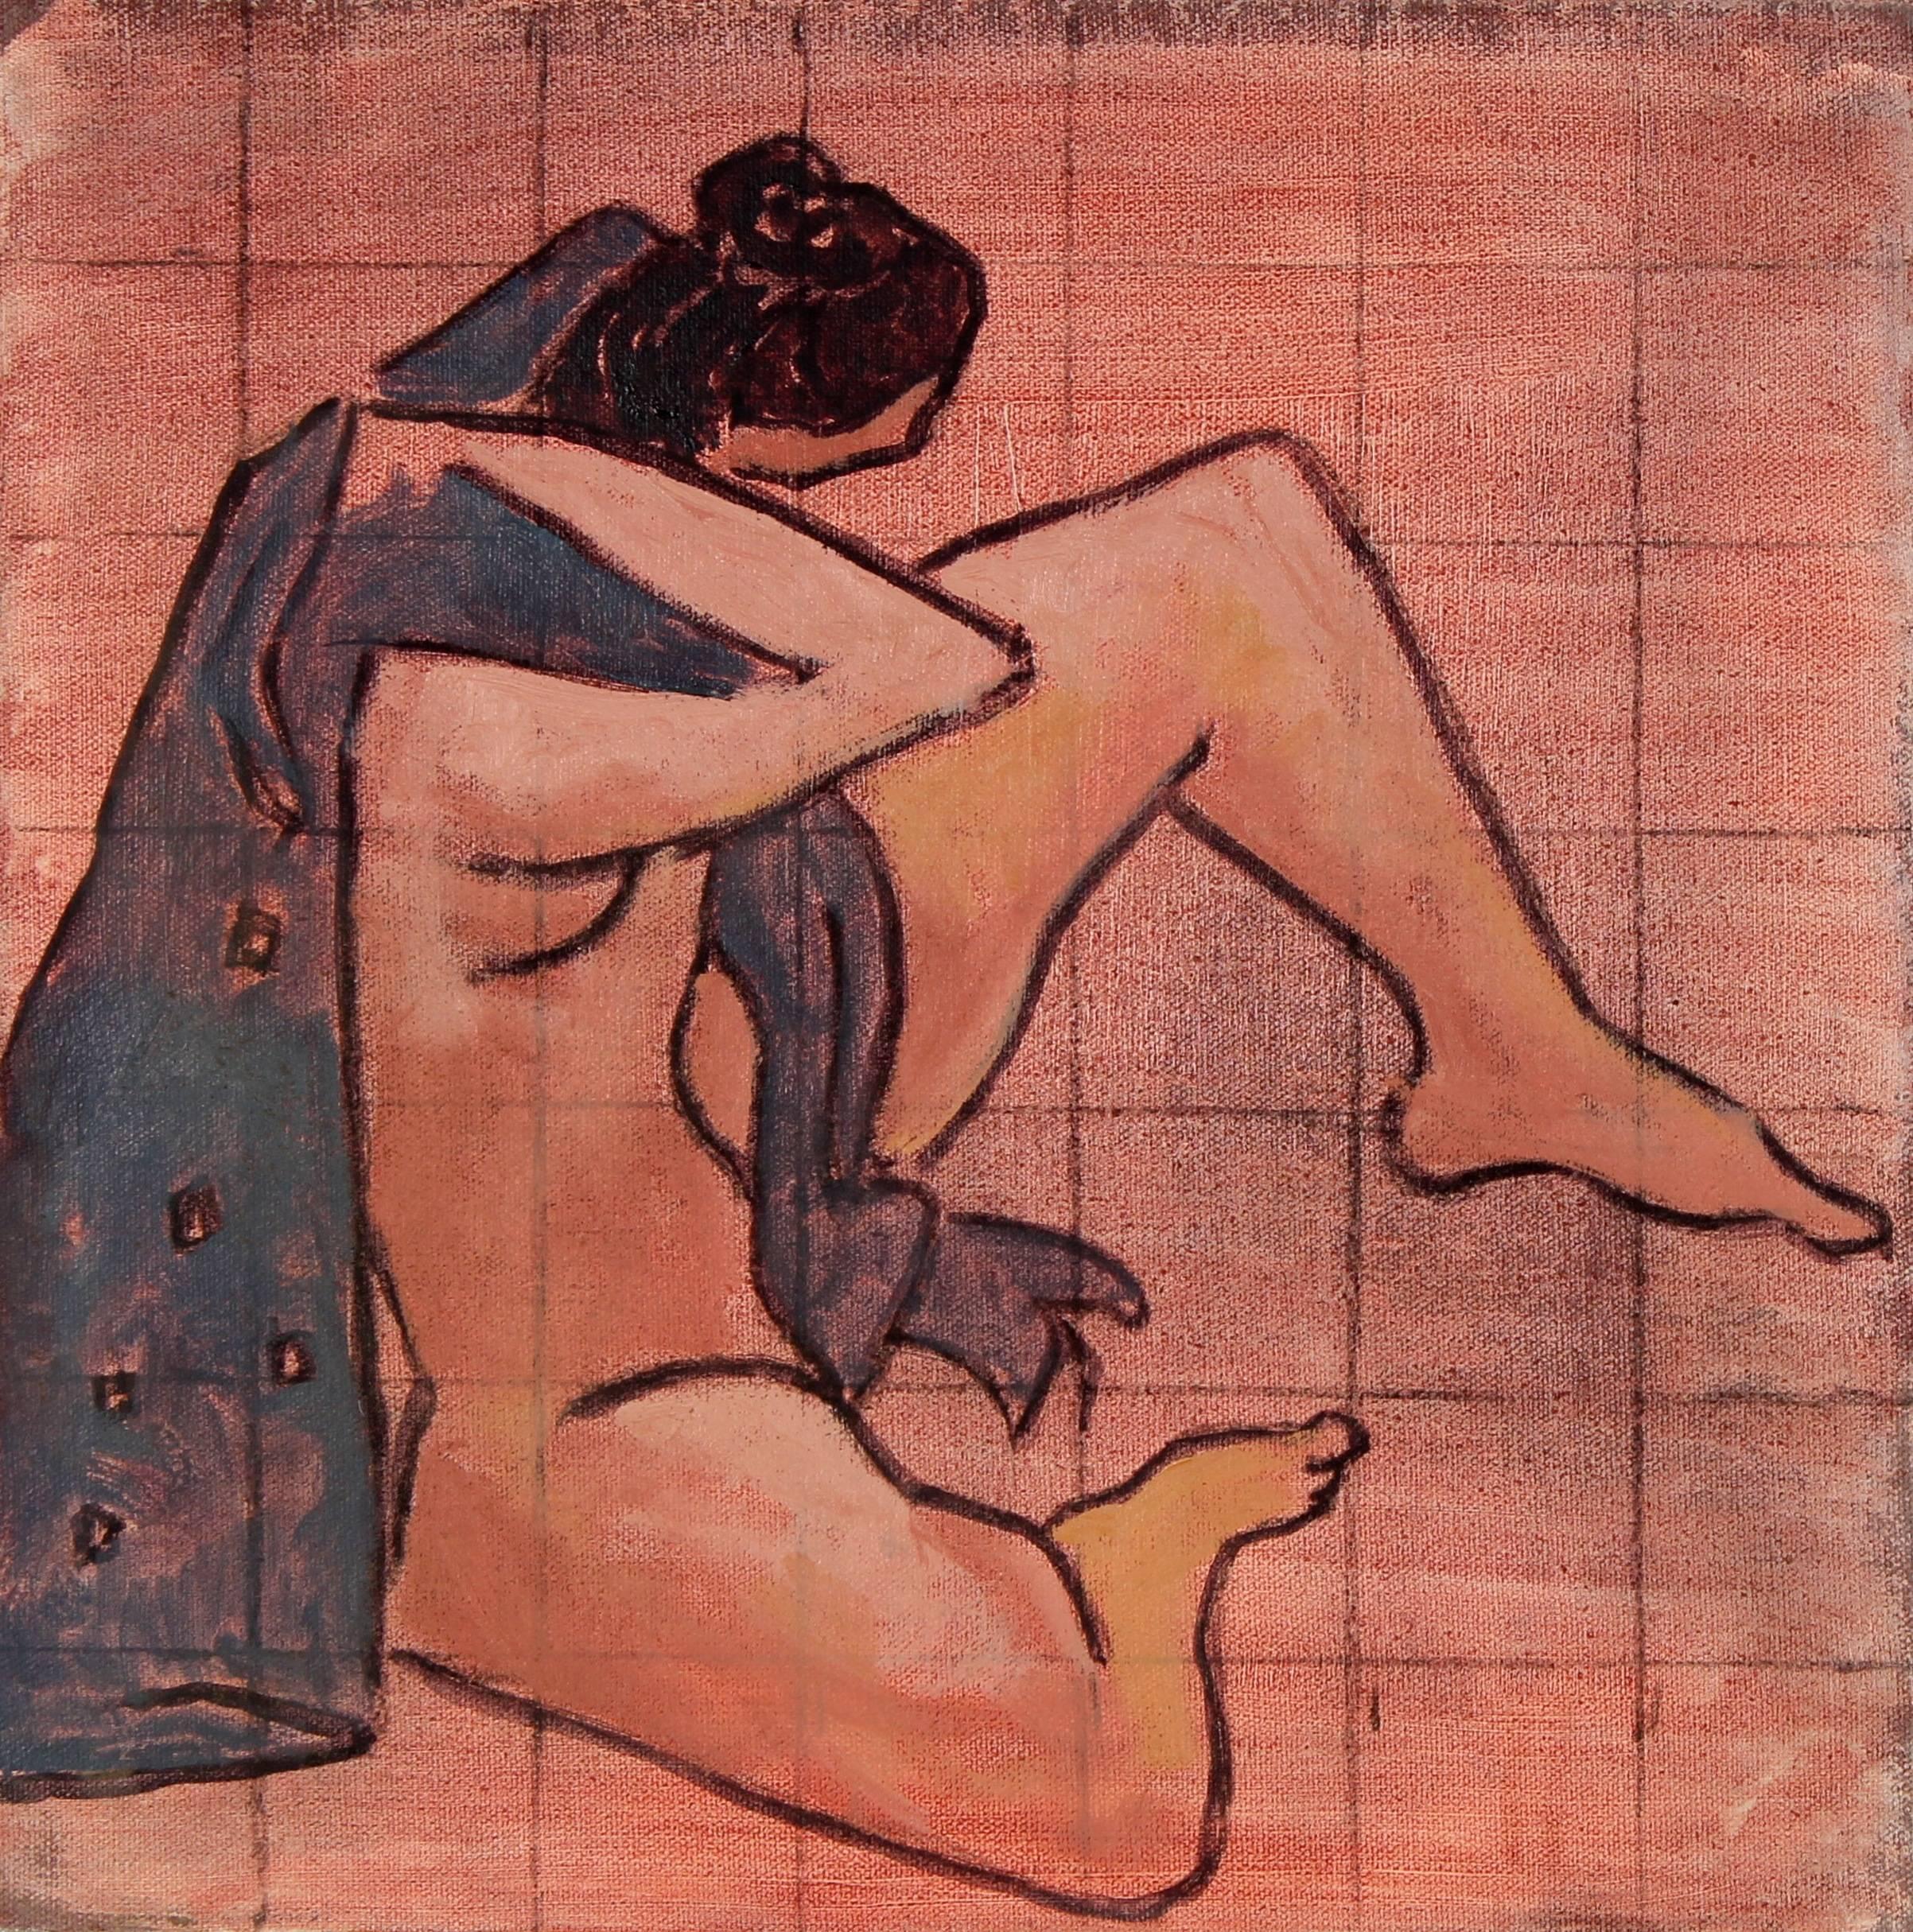 Female Figure in Oil Paint, 20th Century - Painting by Rip Matteson